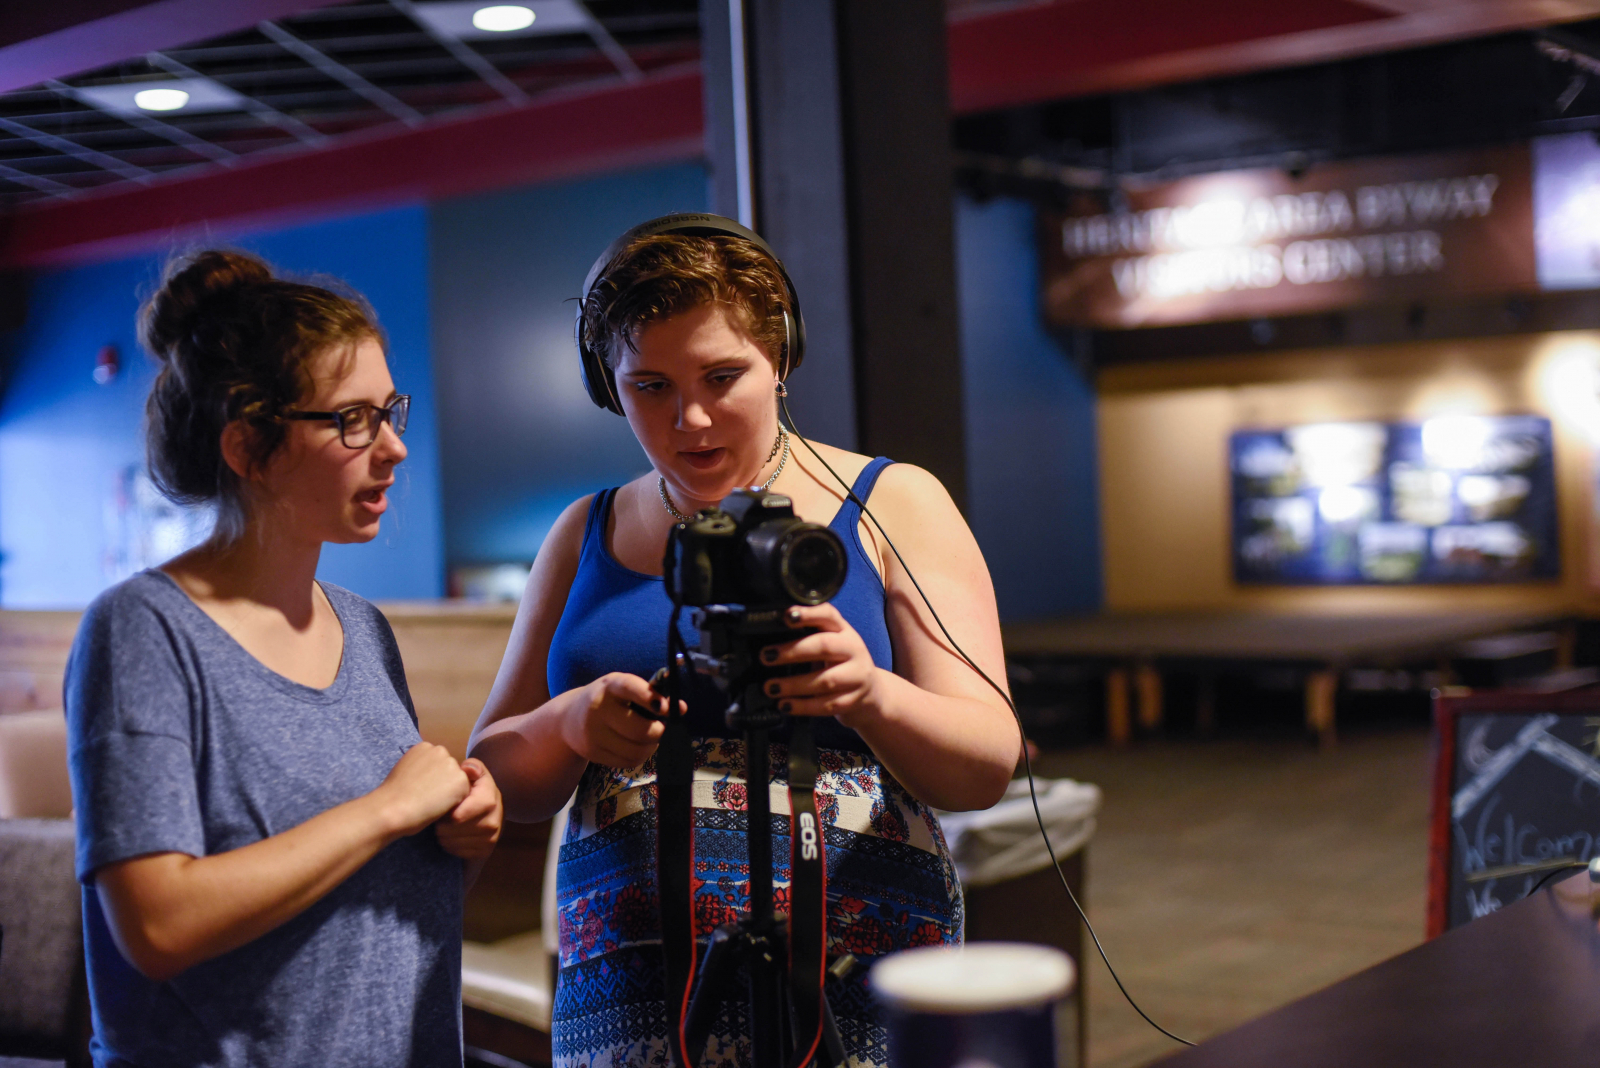 Filmmaking Academy students shoot and edit video at Proctors during their two-week summer education program Tuesday, July 25, 2017.